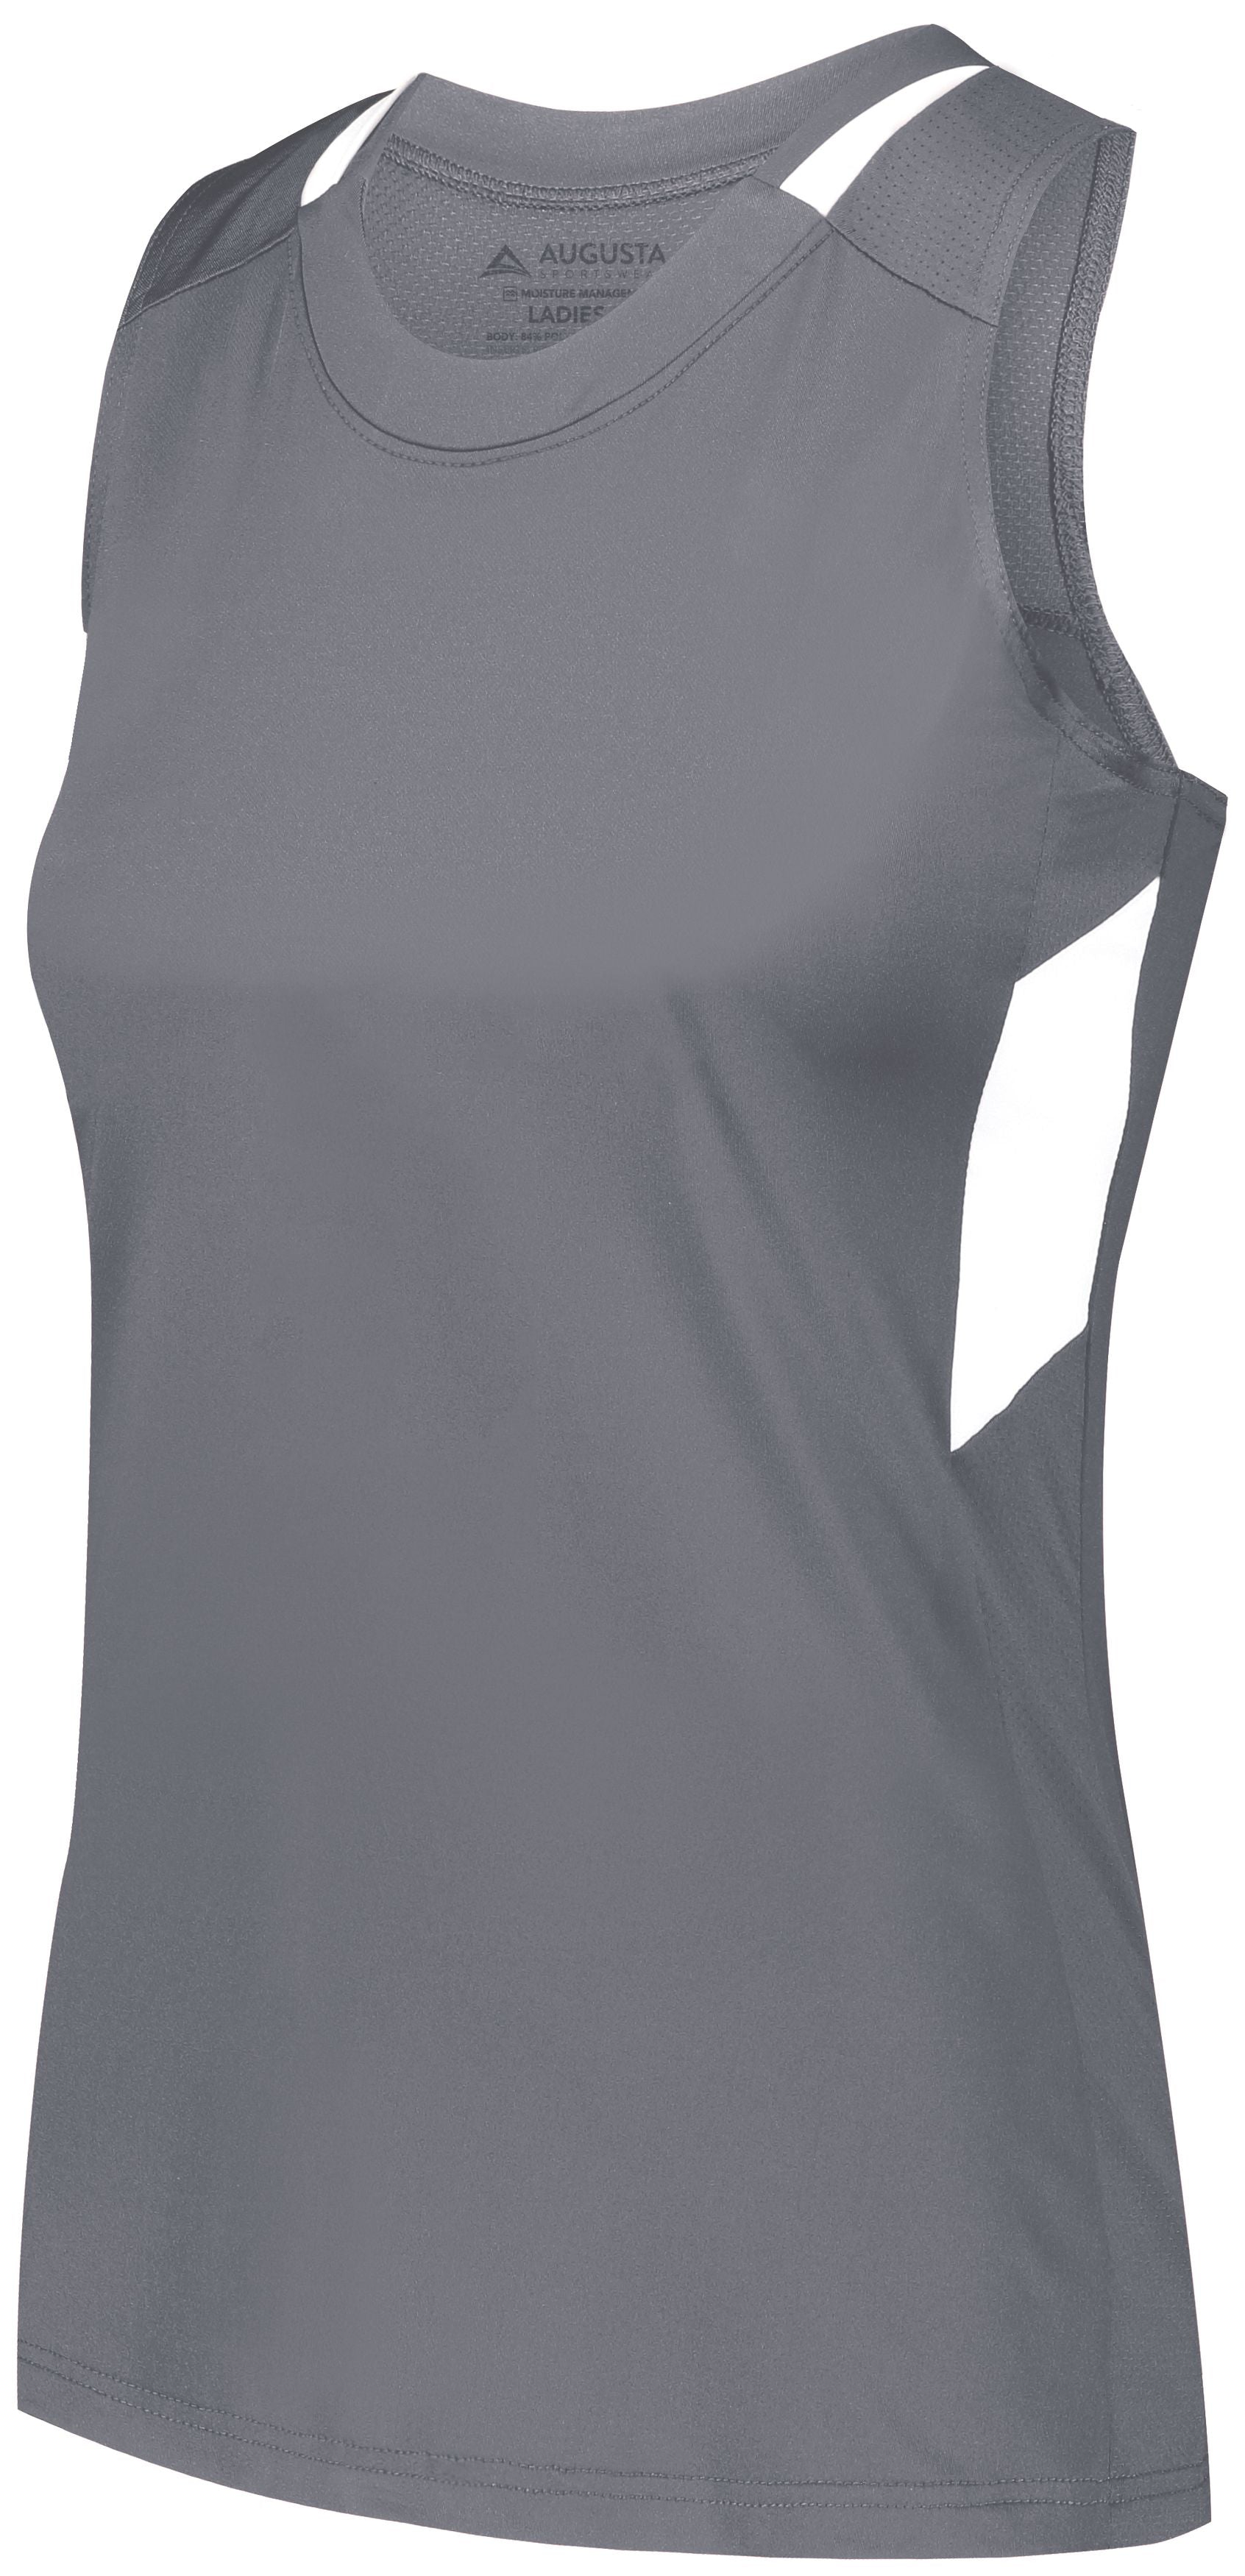 Augusta Sportswear Ladies Crossover Tank in Graphite/White  -Part of the Ladies, Ladies-Tank, Augusta-Products, Lacrosse, Shirts, All-Sports, All-Sports-1 product lines at KanaleyCreations.com